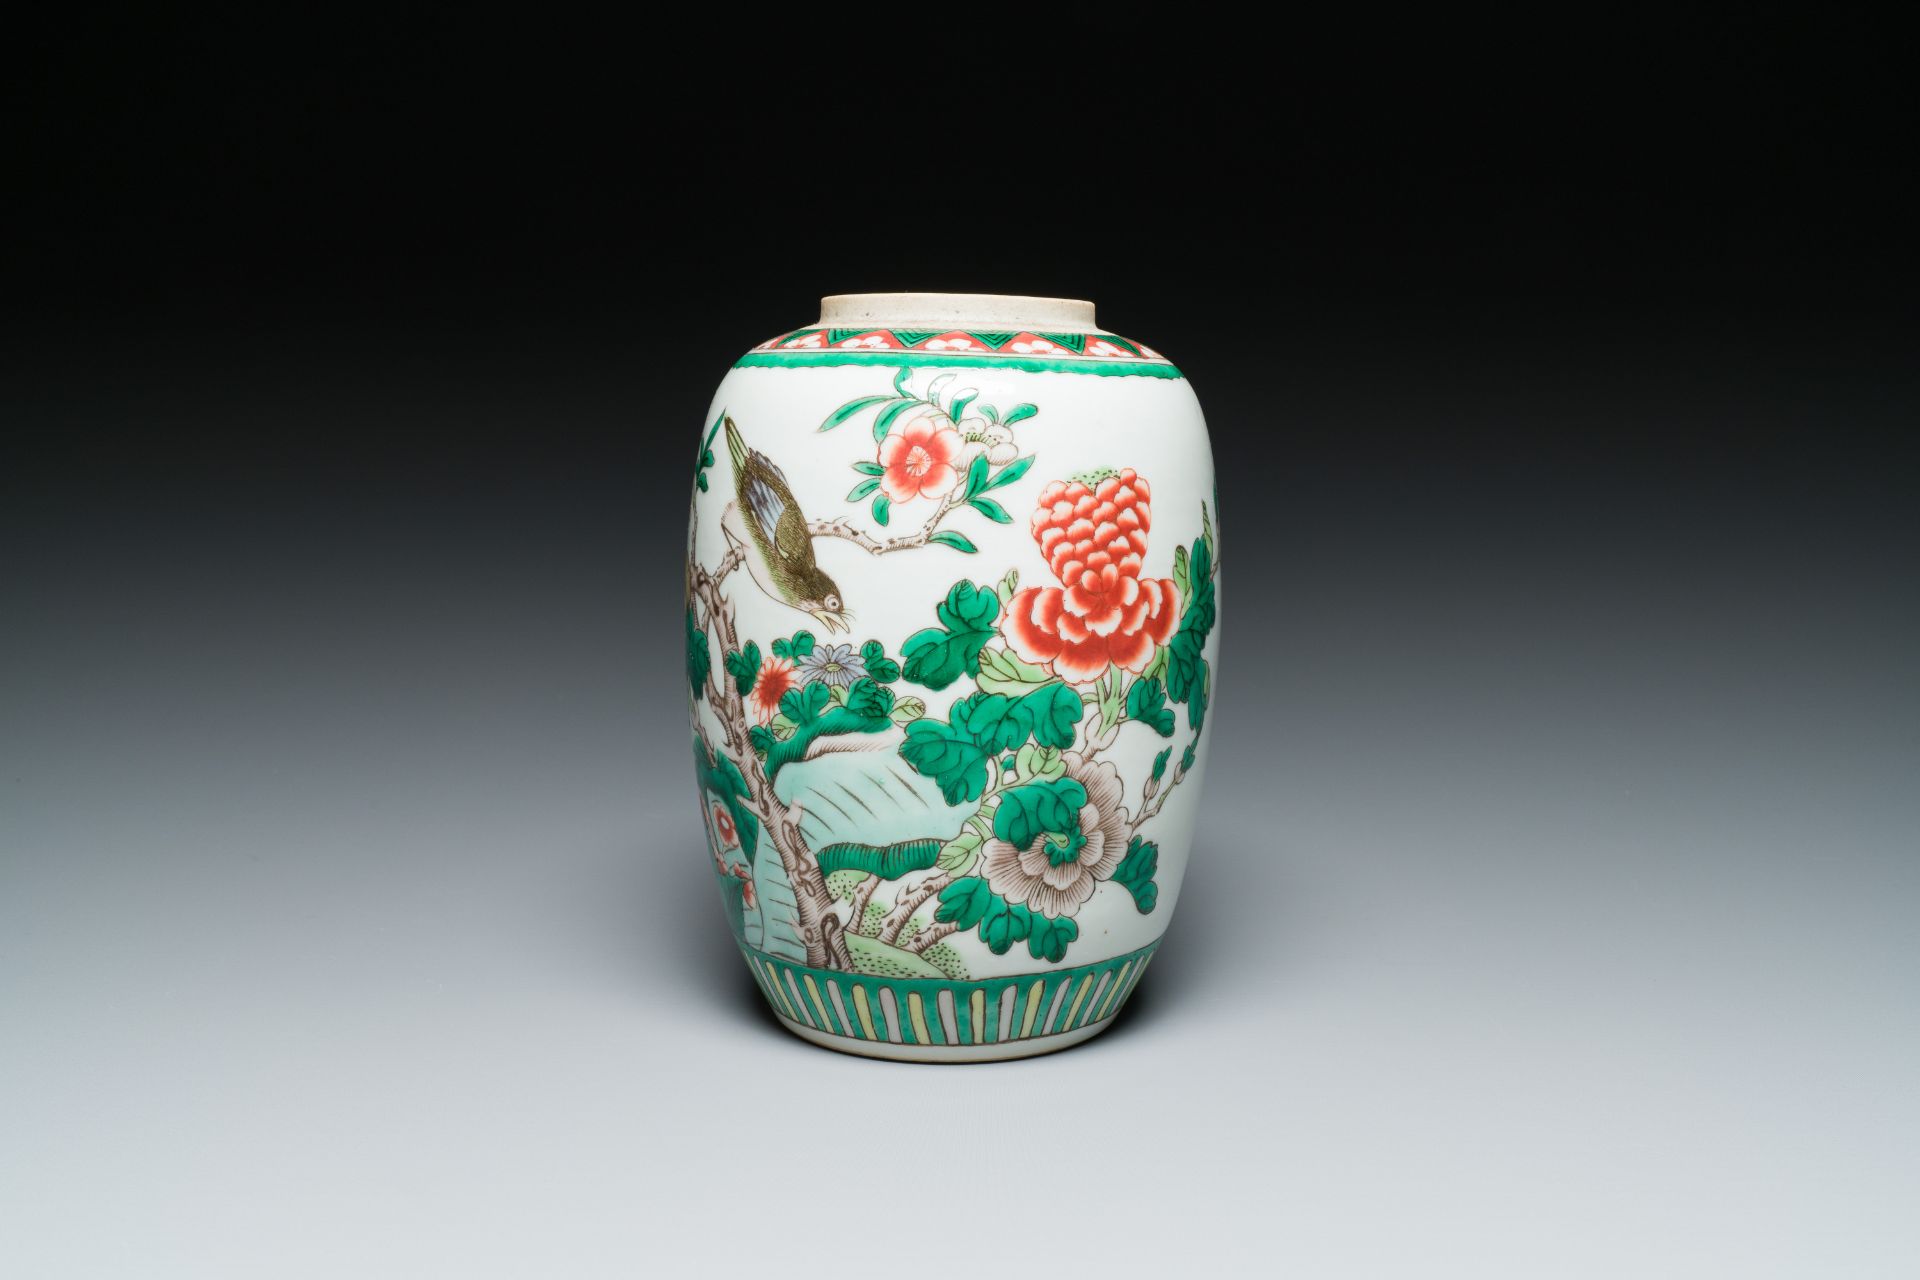 A varied collection of Chinese porcelain, 18/19th C. - Image 15 of 18